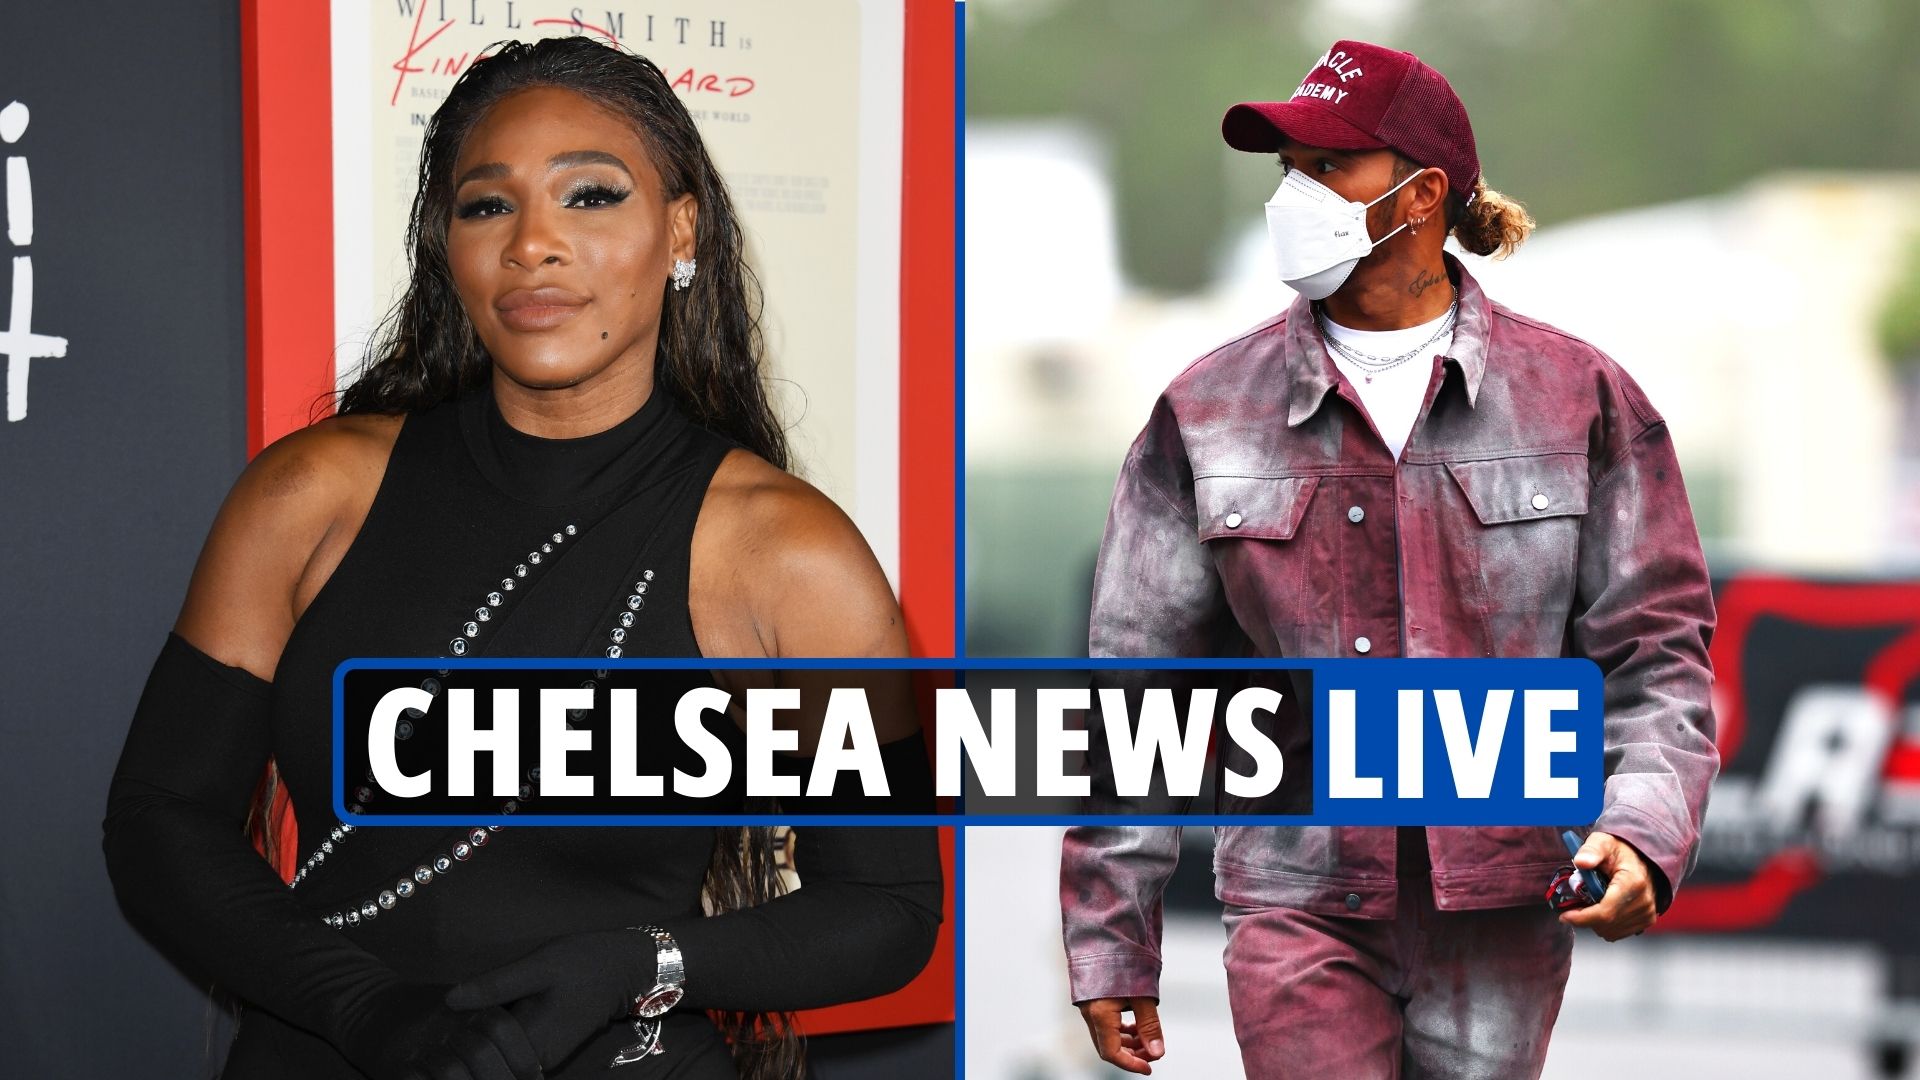 Chelsea news LIVE: Latest transfer, takeover and Roman Abramovich updates